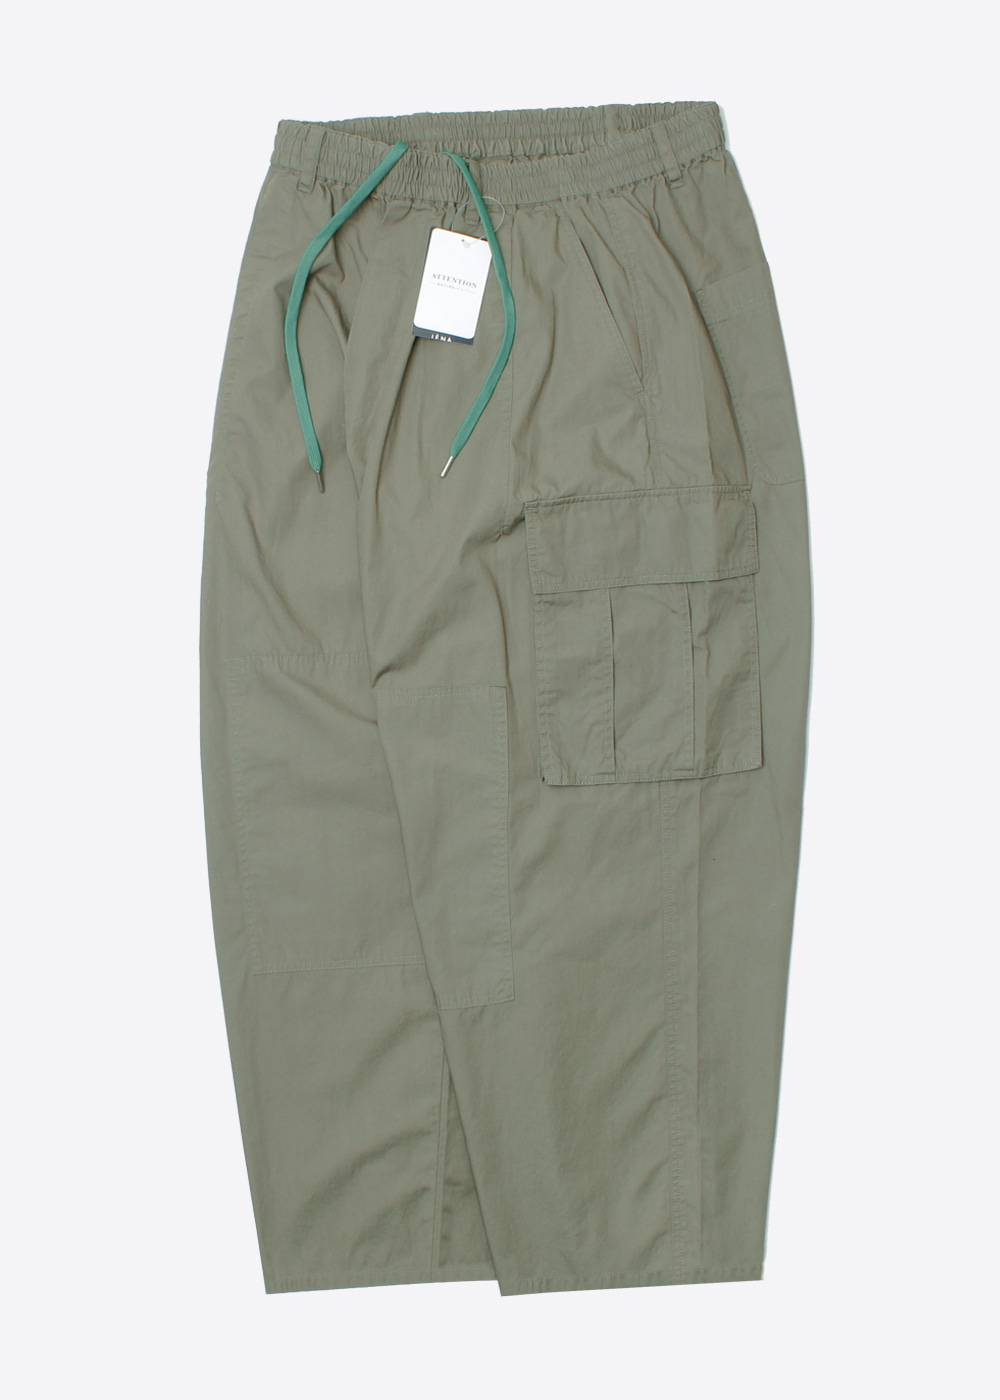 INHERIT BY JOURNAL STANDARD’wide fit’ cotton cargo pant